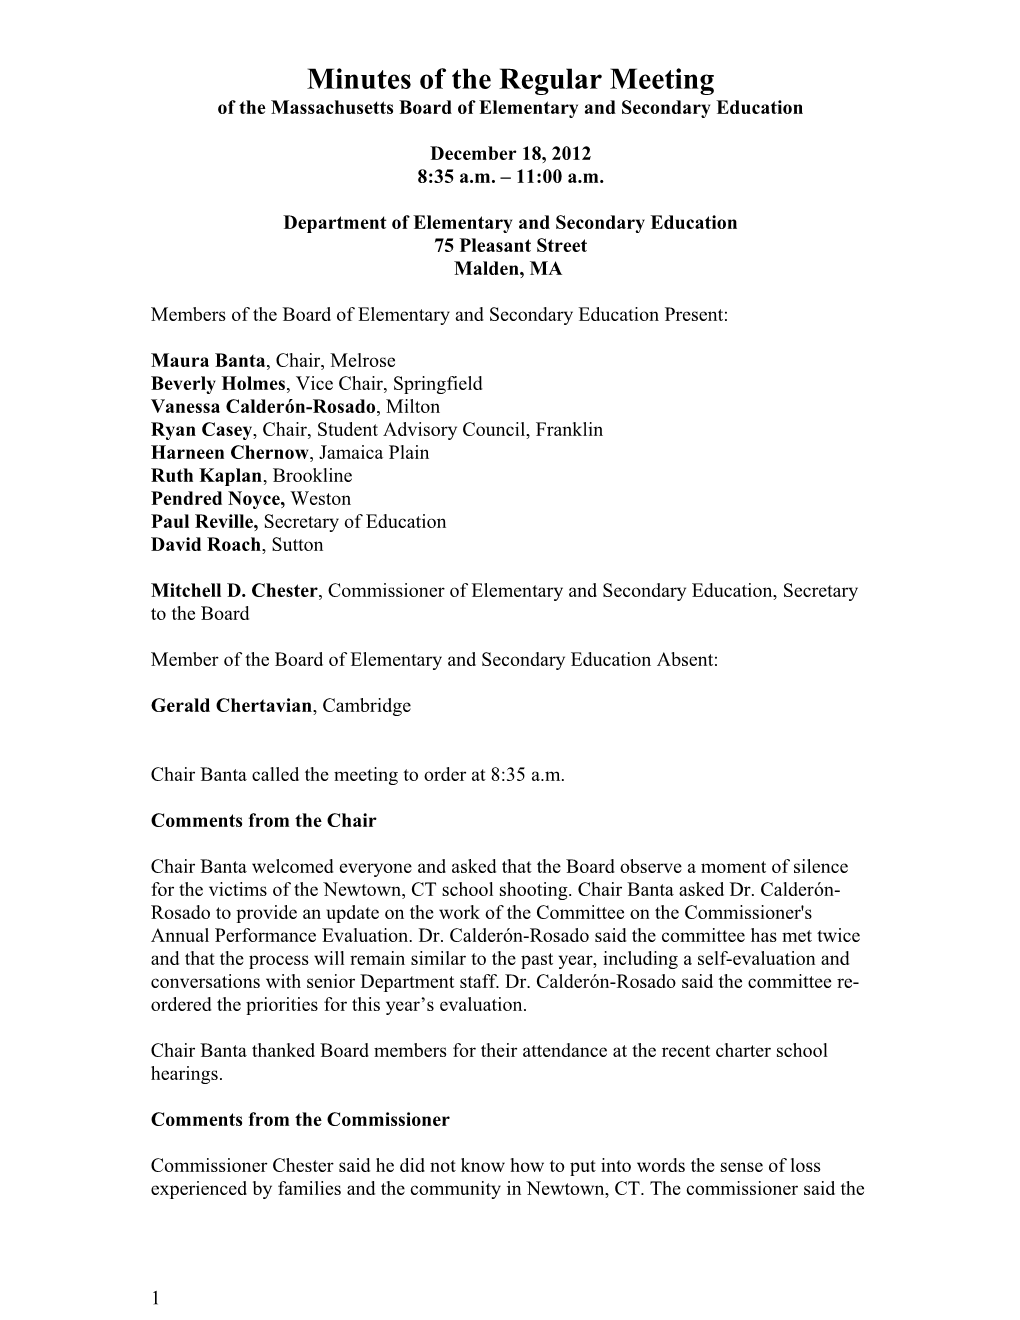 Minutes of the Board of Elementary and Secondary Education's December 18, 2012 Meeting